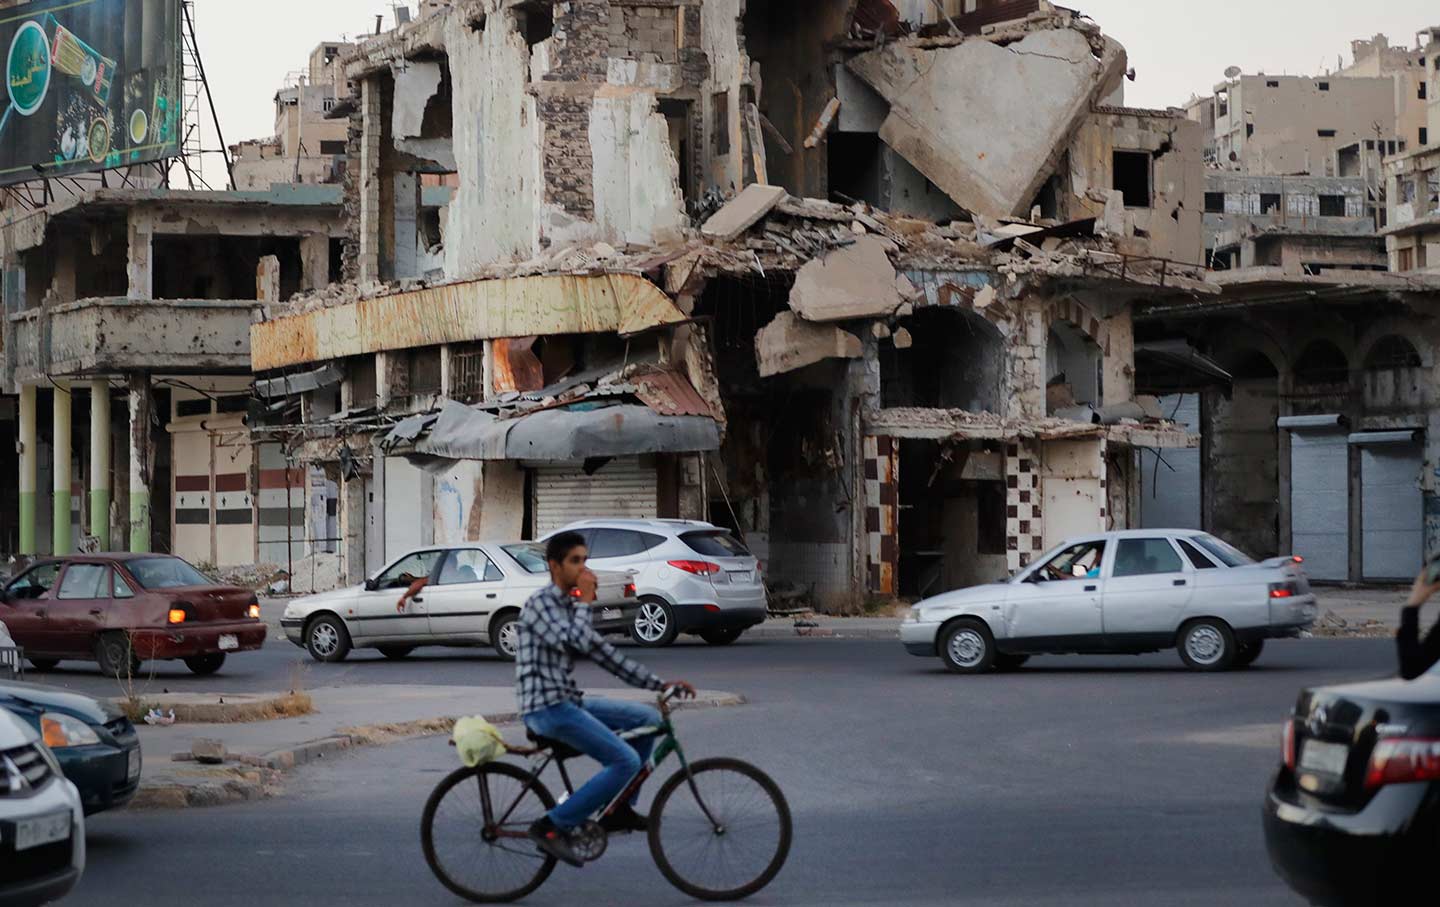 A man rides his bike past damaged buildings in the old town of Homs, Syria, on August 15, 2018.